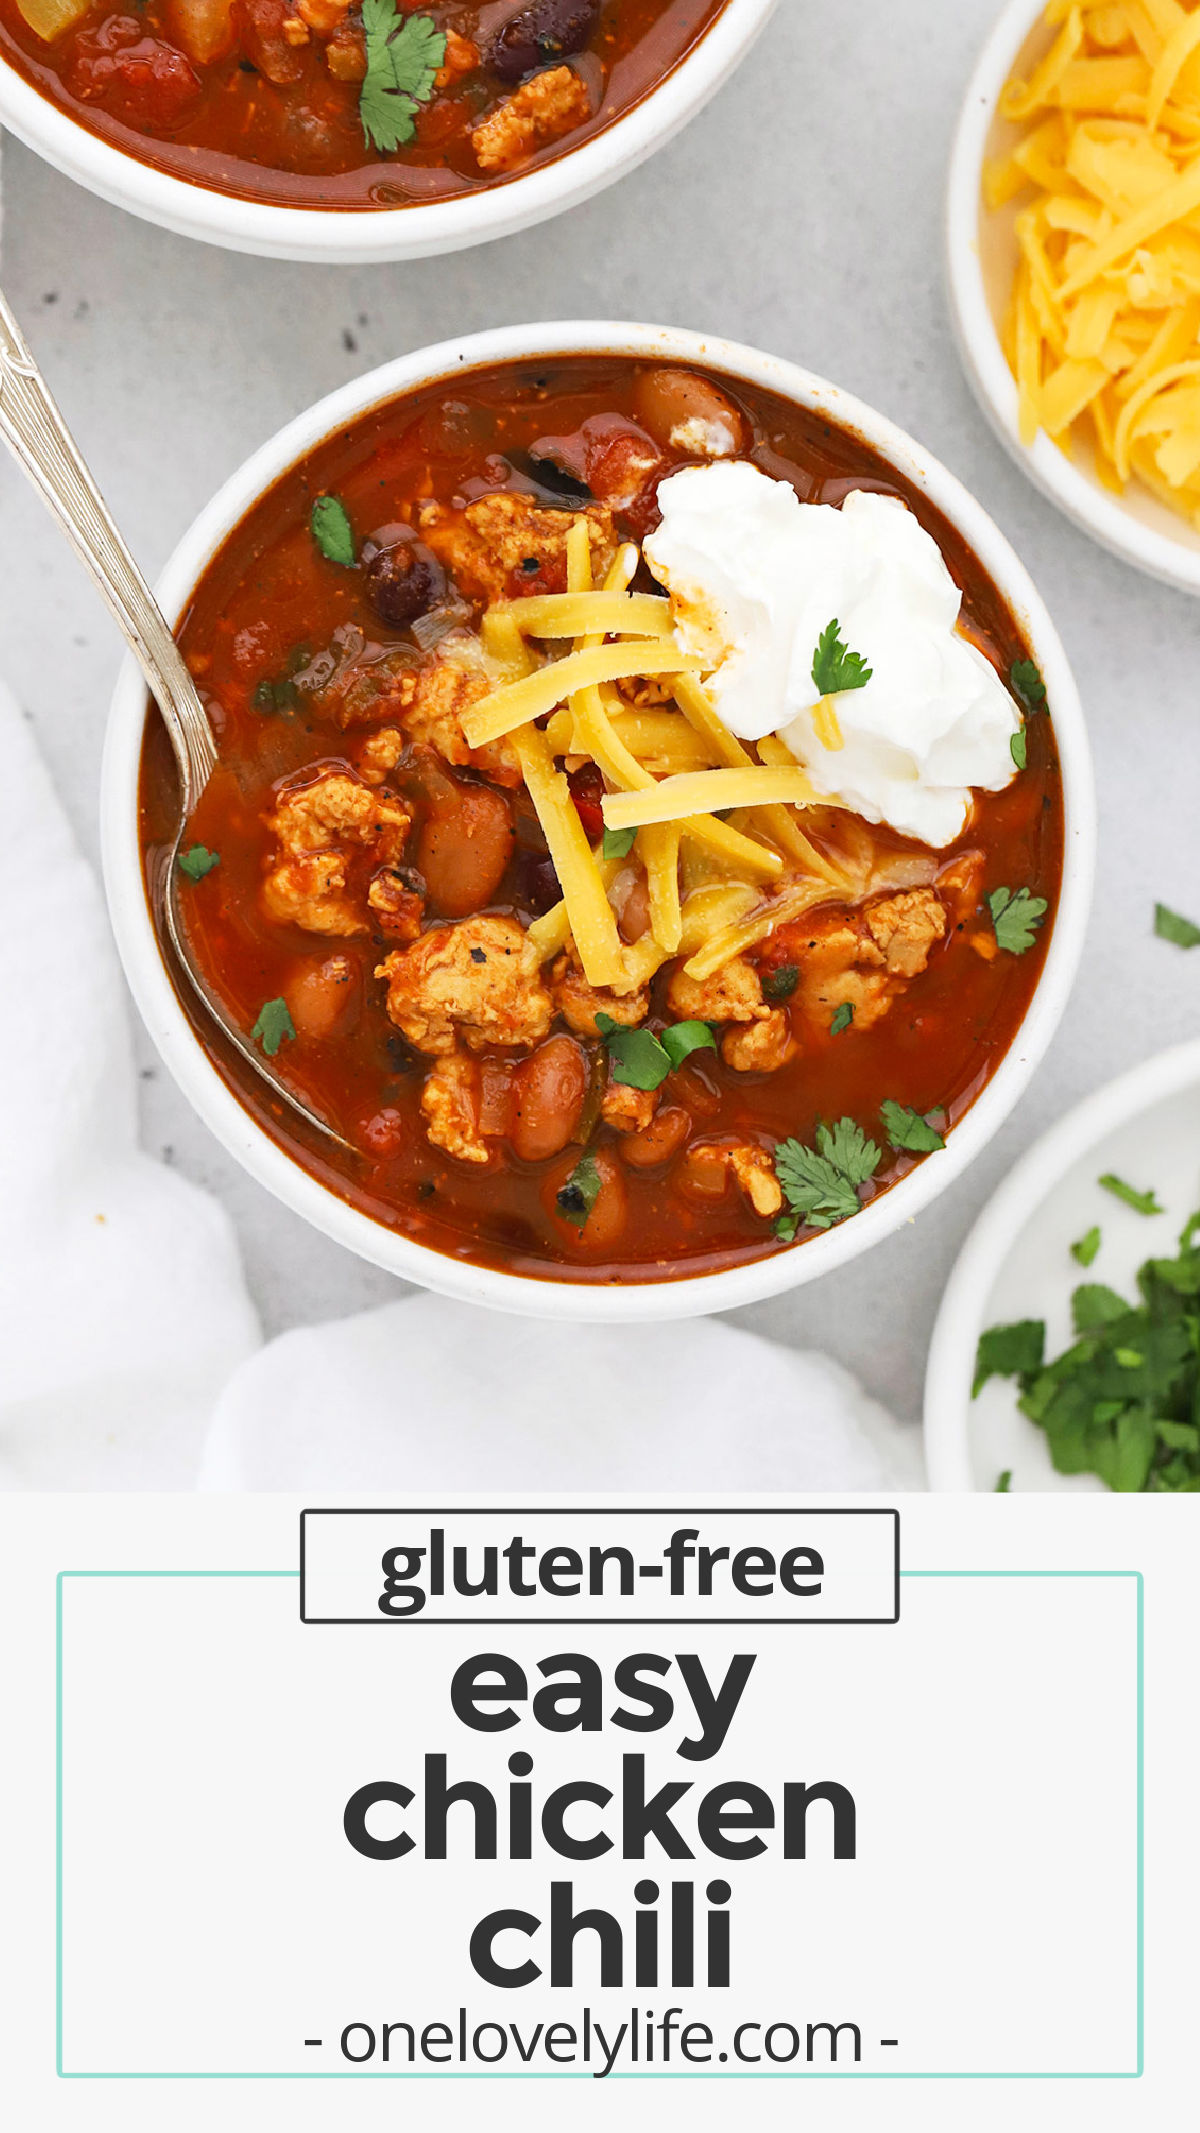 Easy Chicken Chili - this easy ground chicken chili recipe is FULL of bold flavor in every bite. It's packed with lean protein, and freezes like a dream! // the best ground chicken chili // high protein chili / easy chili recipe / low fat chili recipe / gluten free chili / chili with ground chicken / chili with chicken / healthy chicken chili / healthy chili recipe